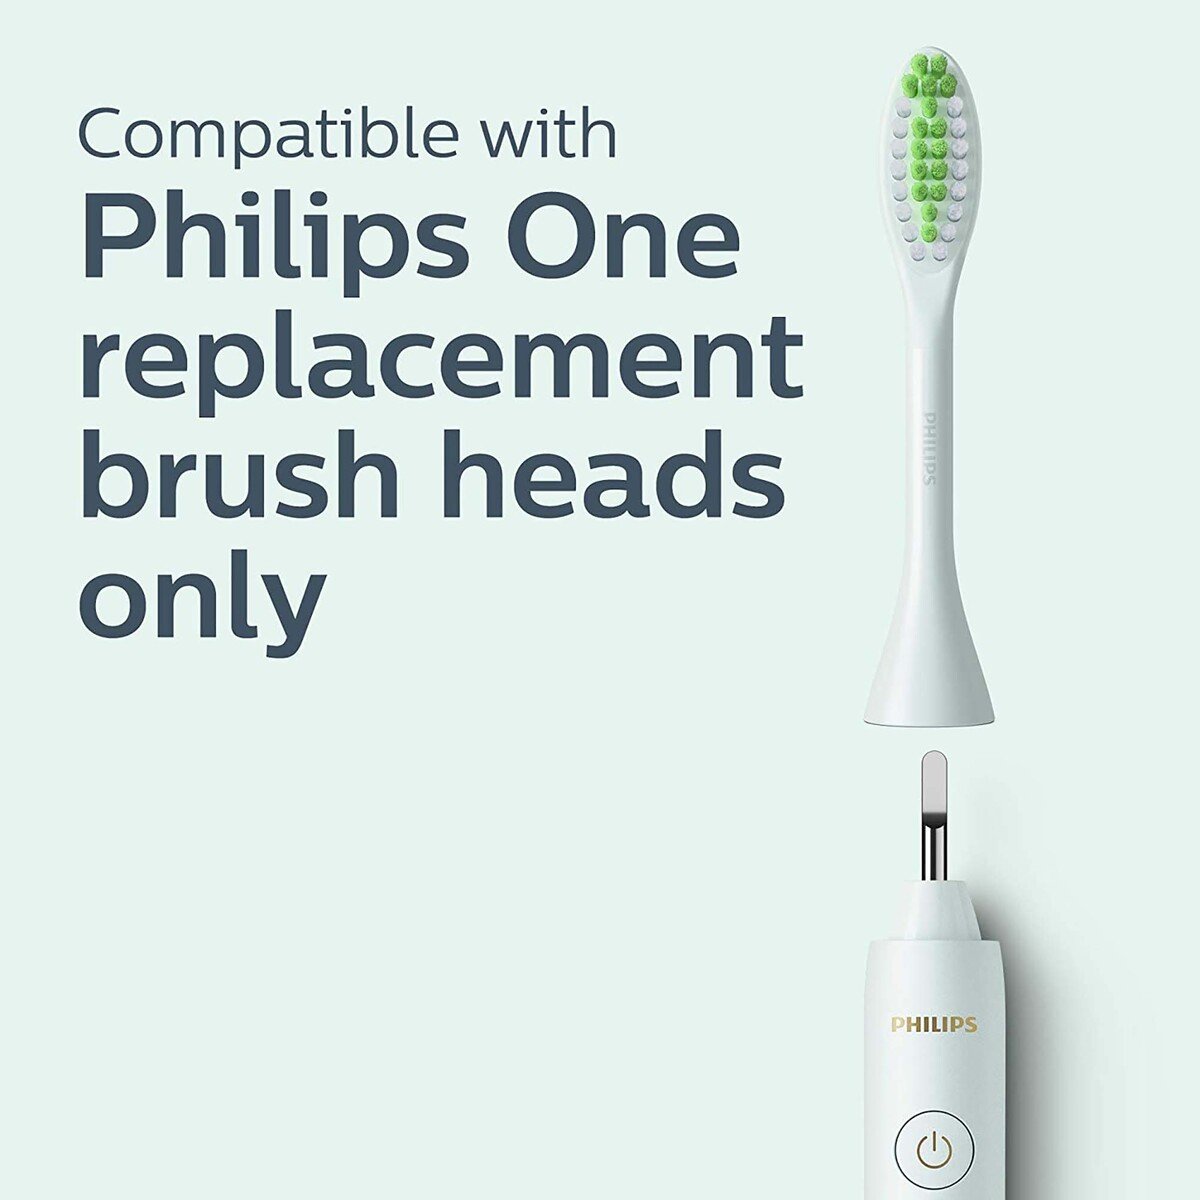 Philips One by Sonicare Battery Toothbrush Mint Light Blue HY1100